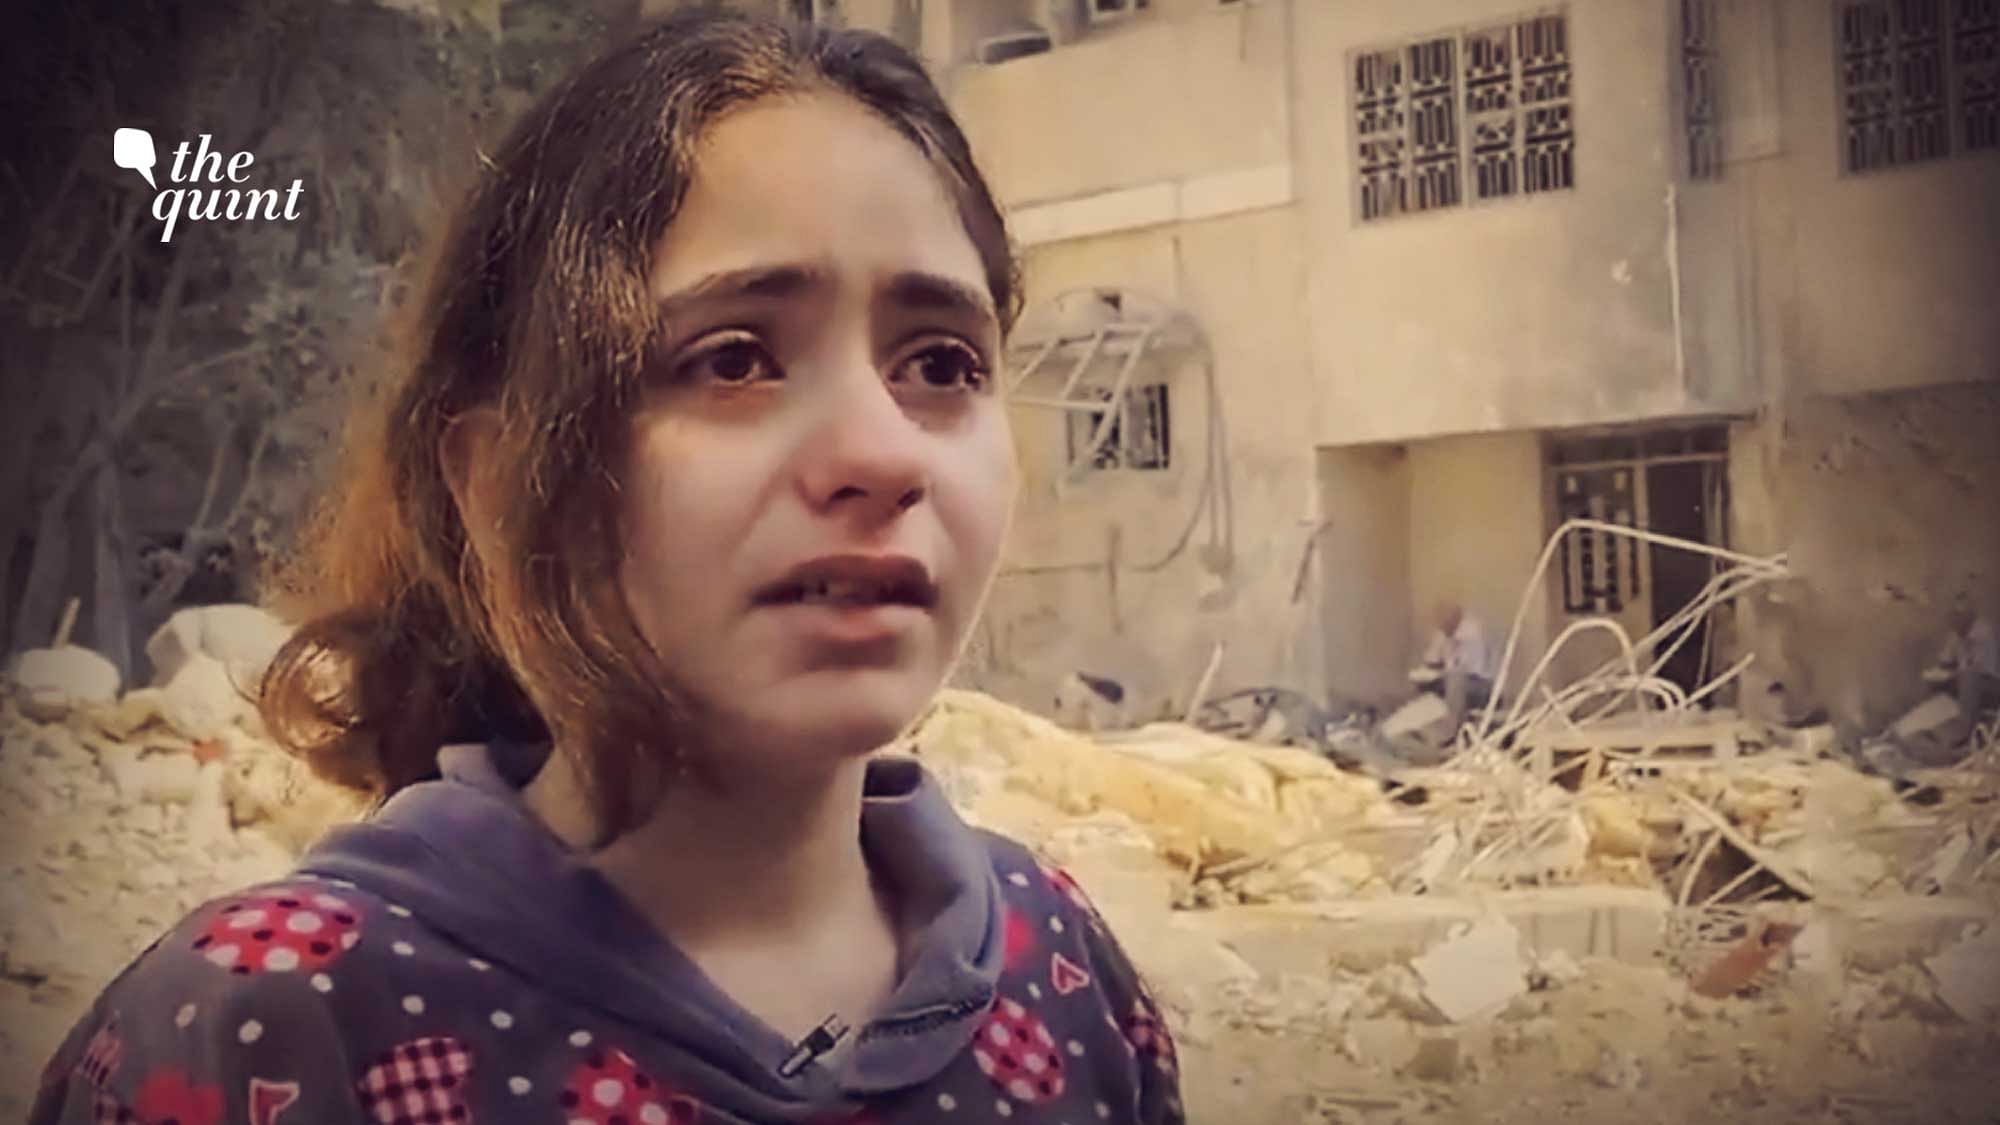 10-year-old Palestinian girl breaks down after Israeli air strikes destroyed her neighbour’s house